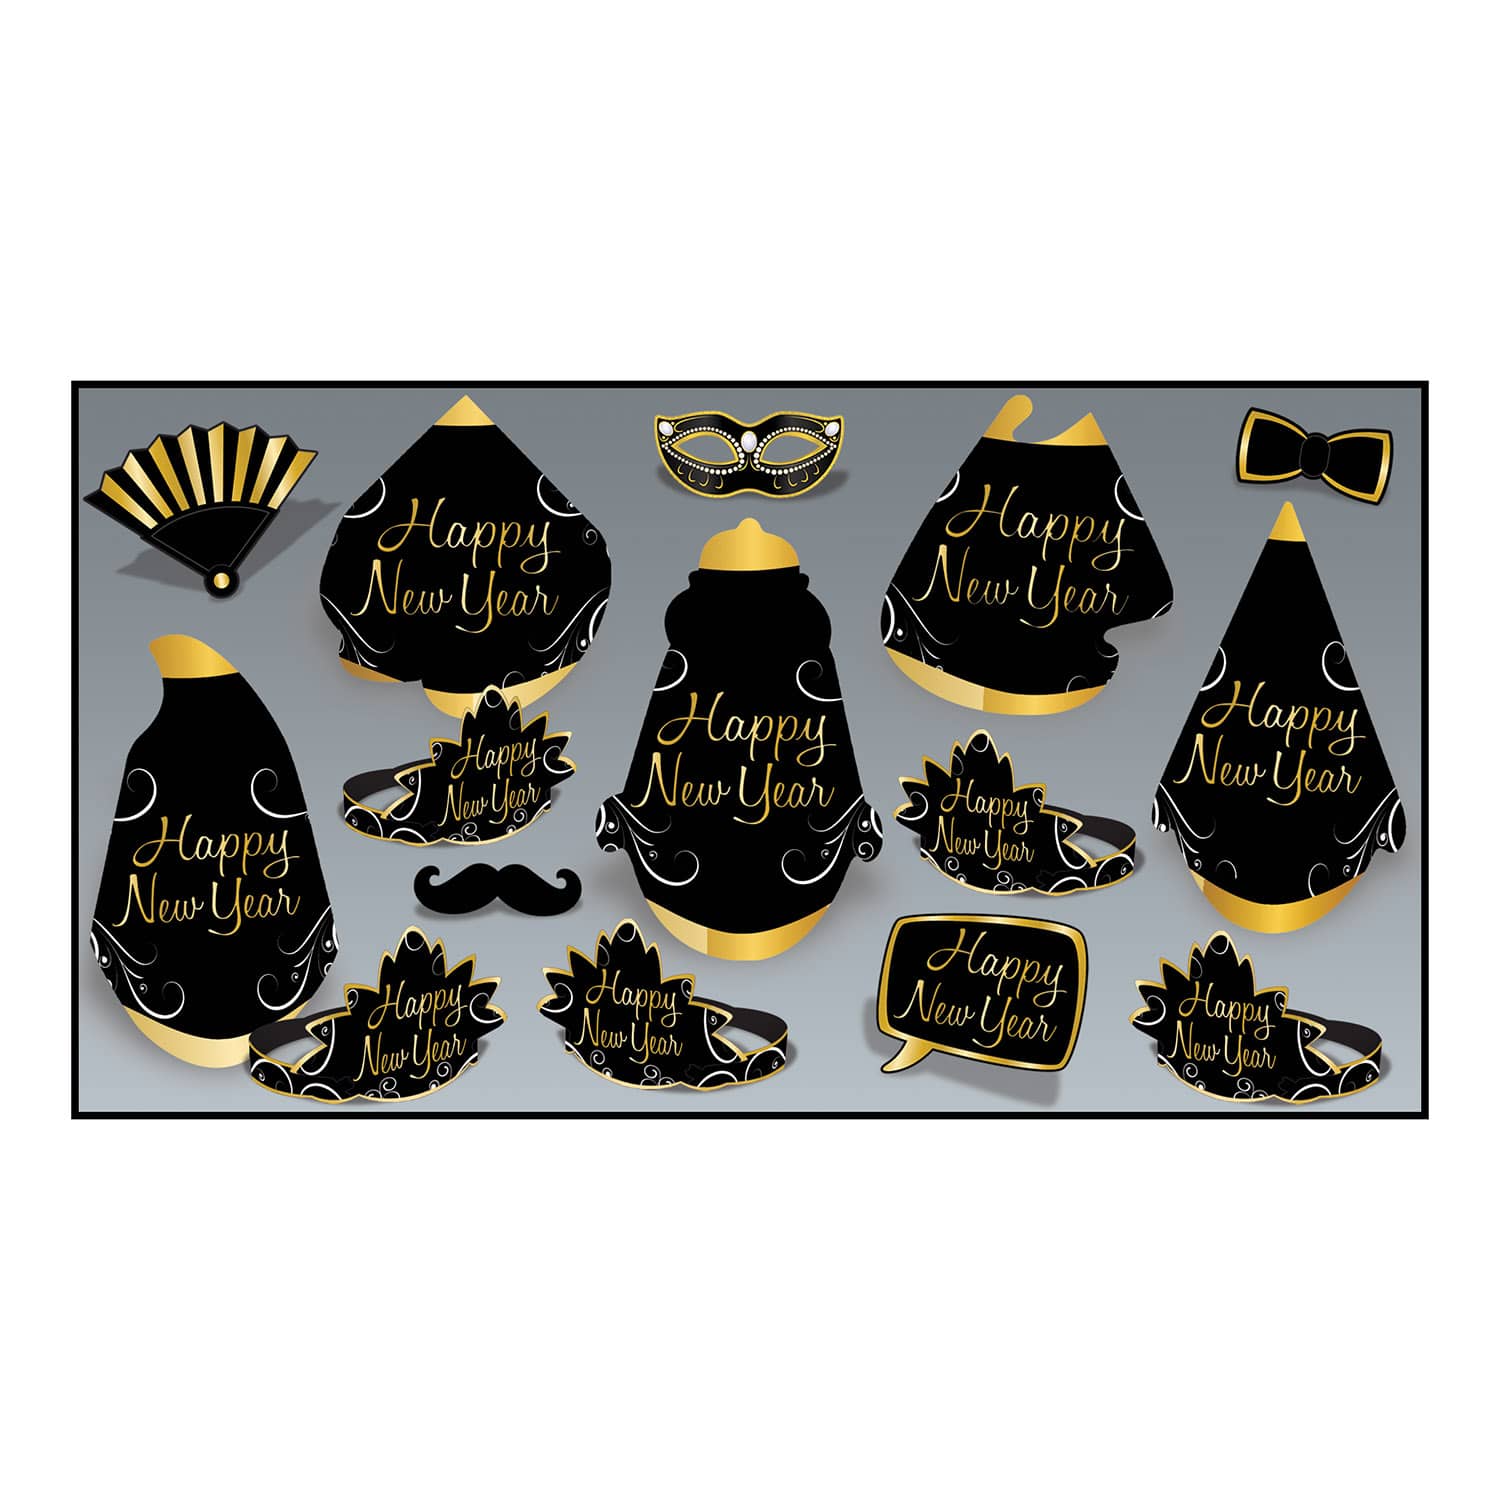 Simply Paper Black and Gold Assortment for 10